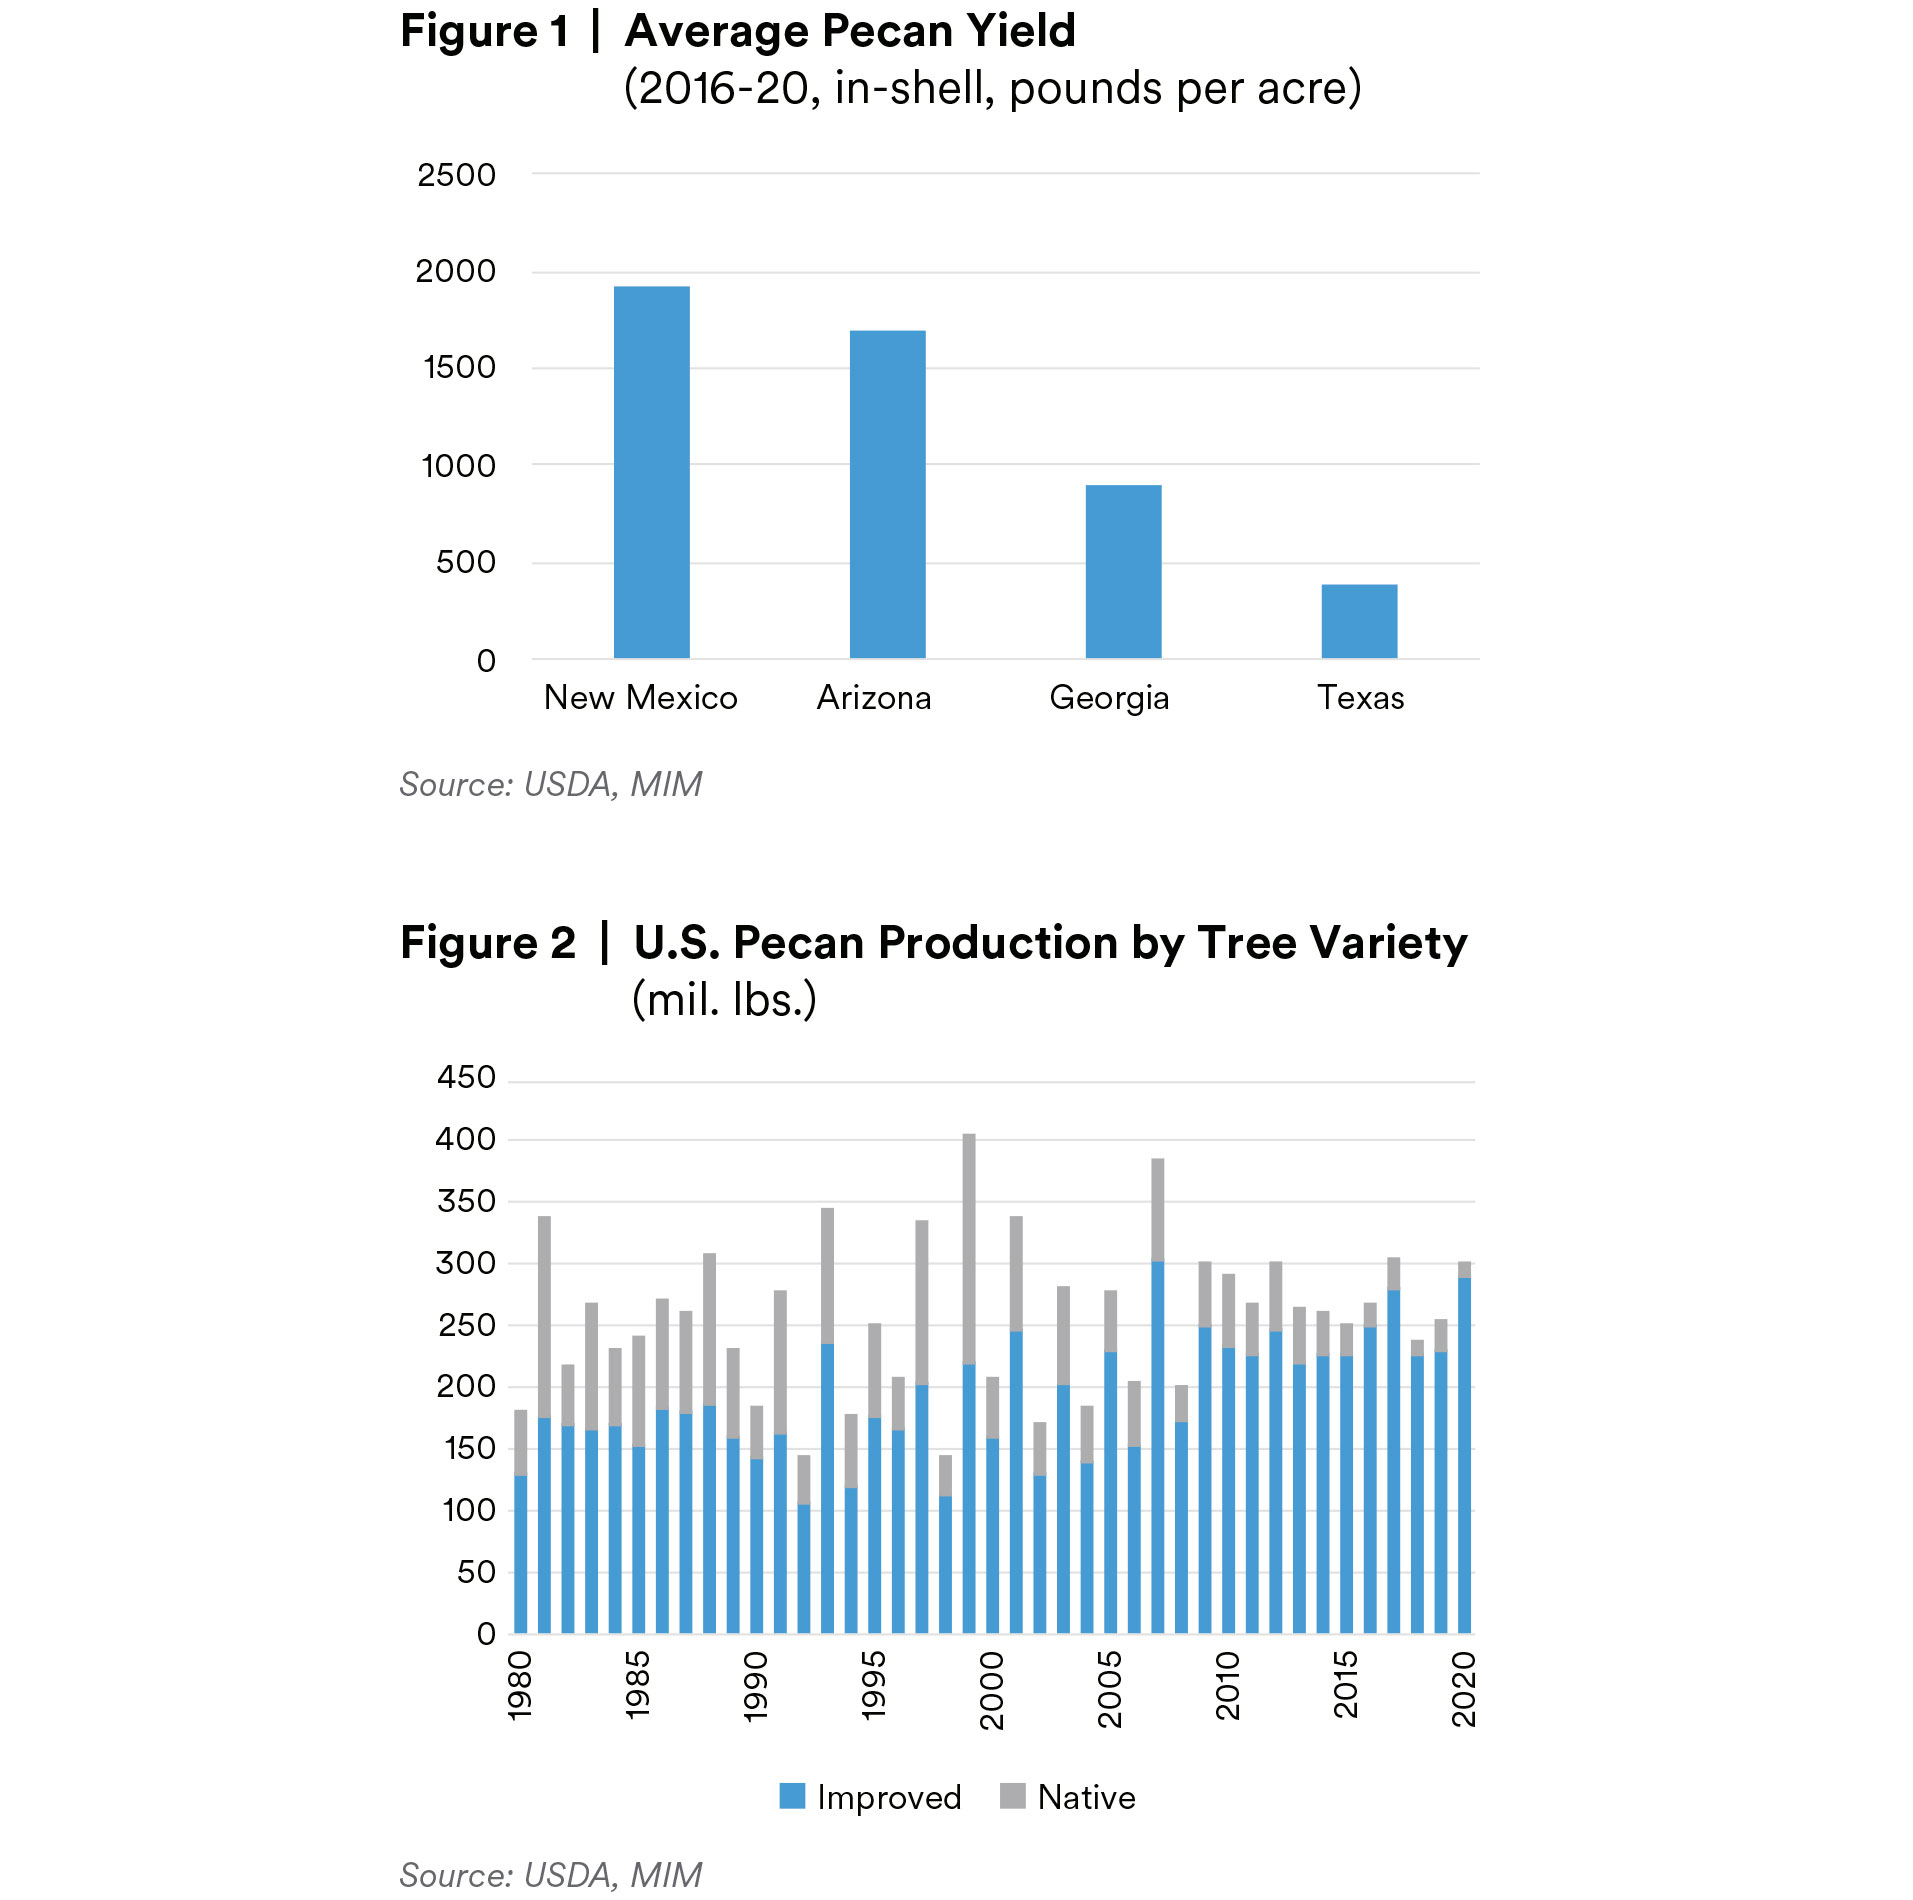 Chart Figure 1 showing Average Pecan Yield 2016-2020, in-shell, pounds per acre and Figure 2 showing Pecan Production by Tree Variety